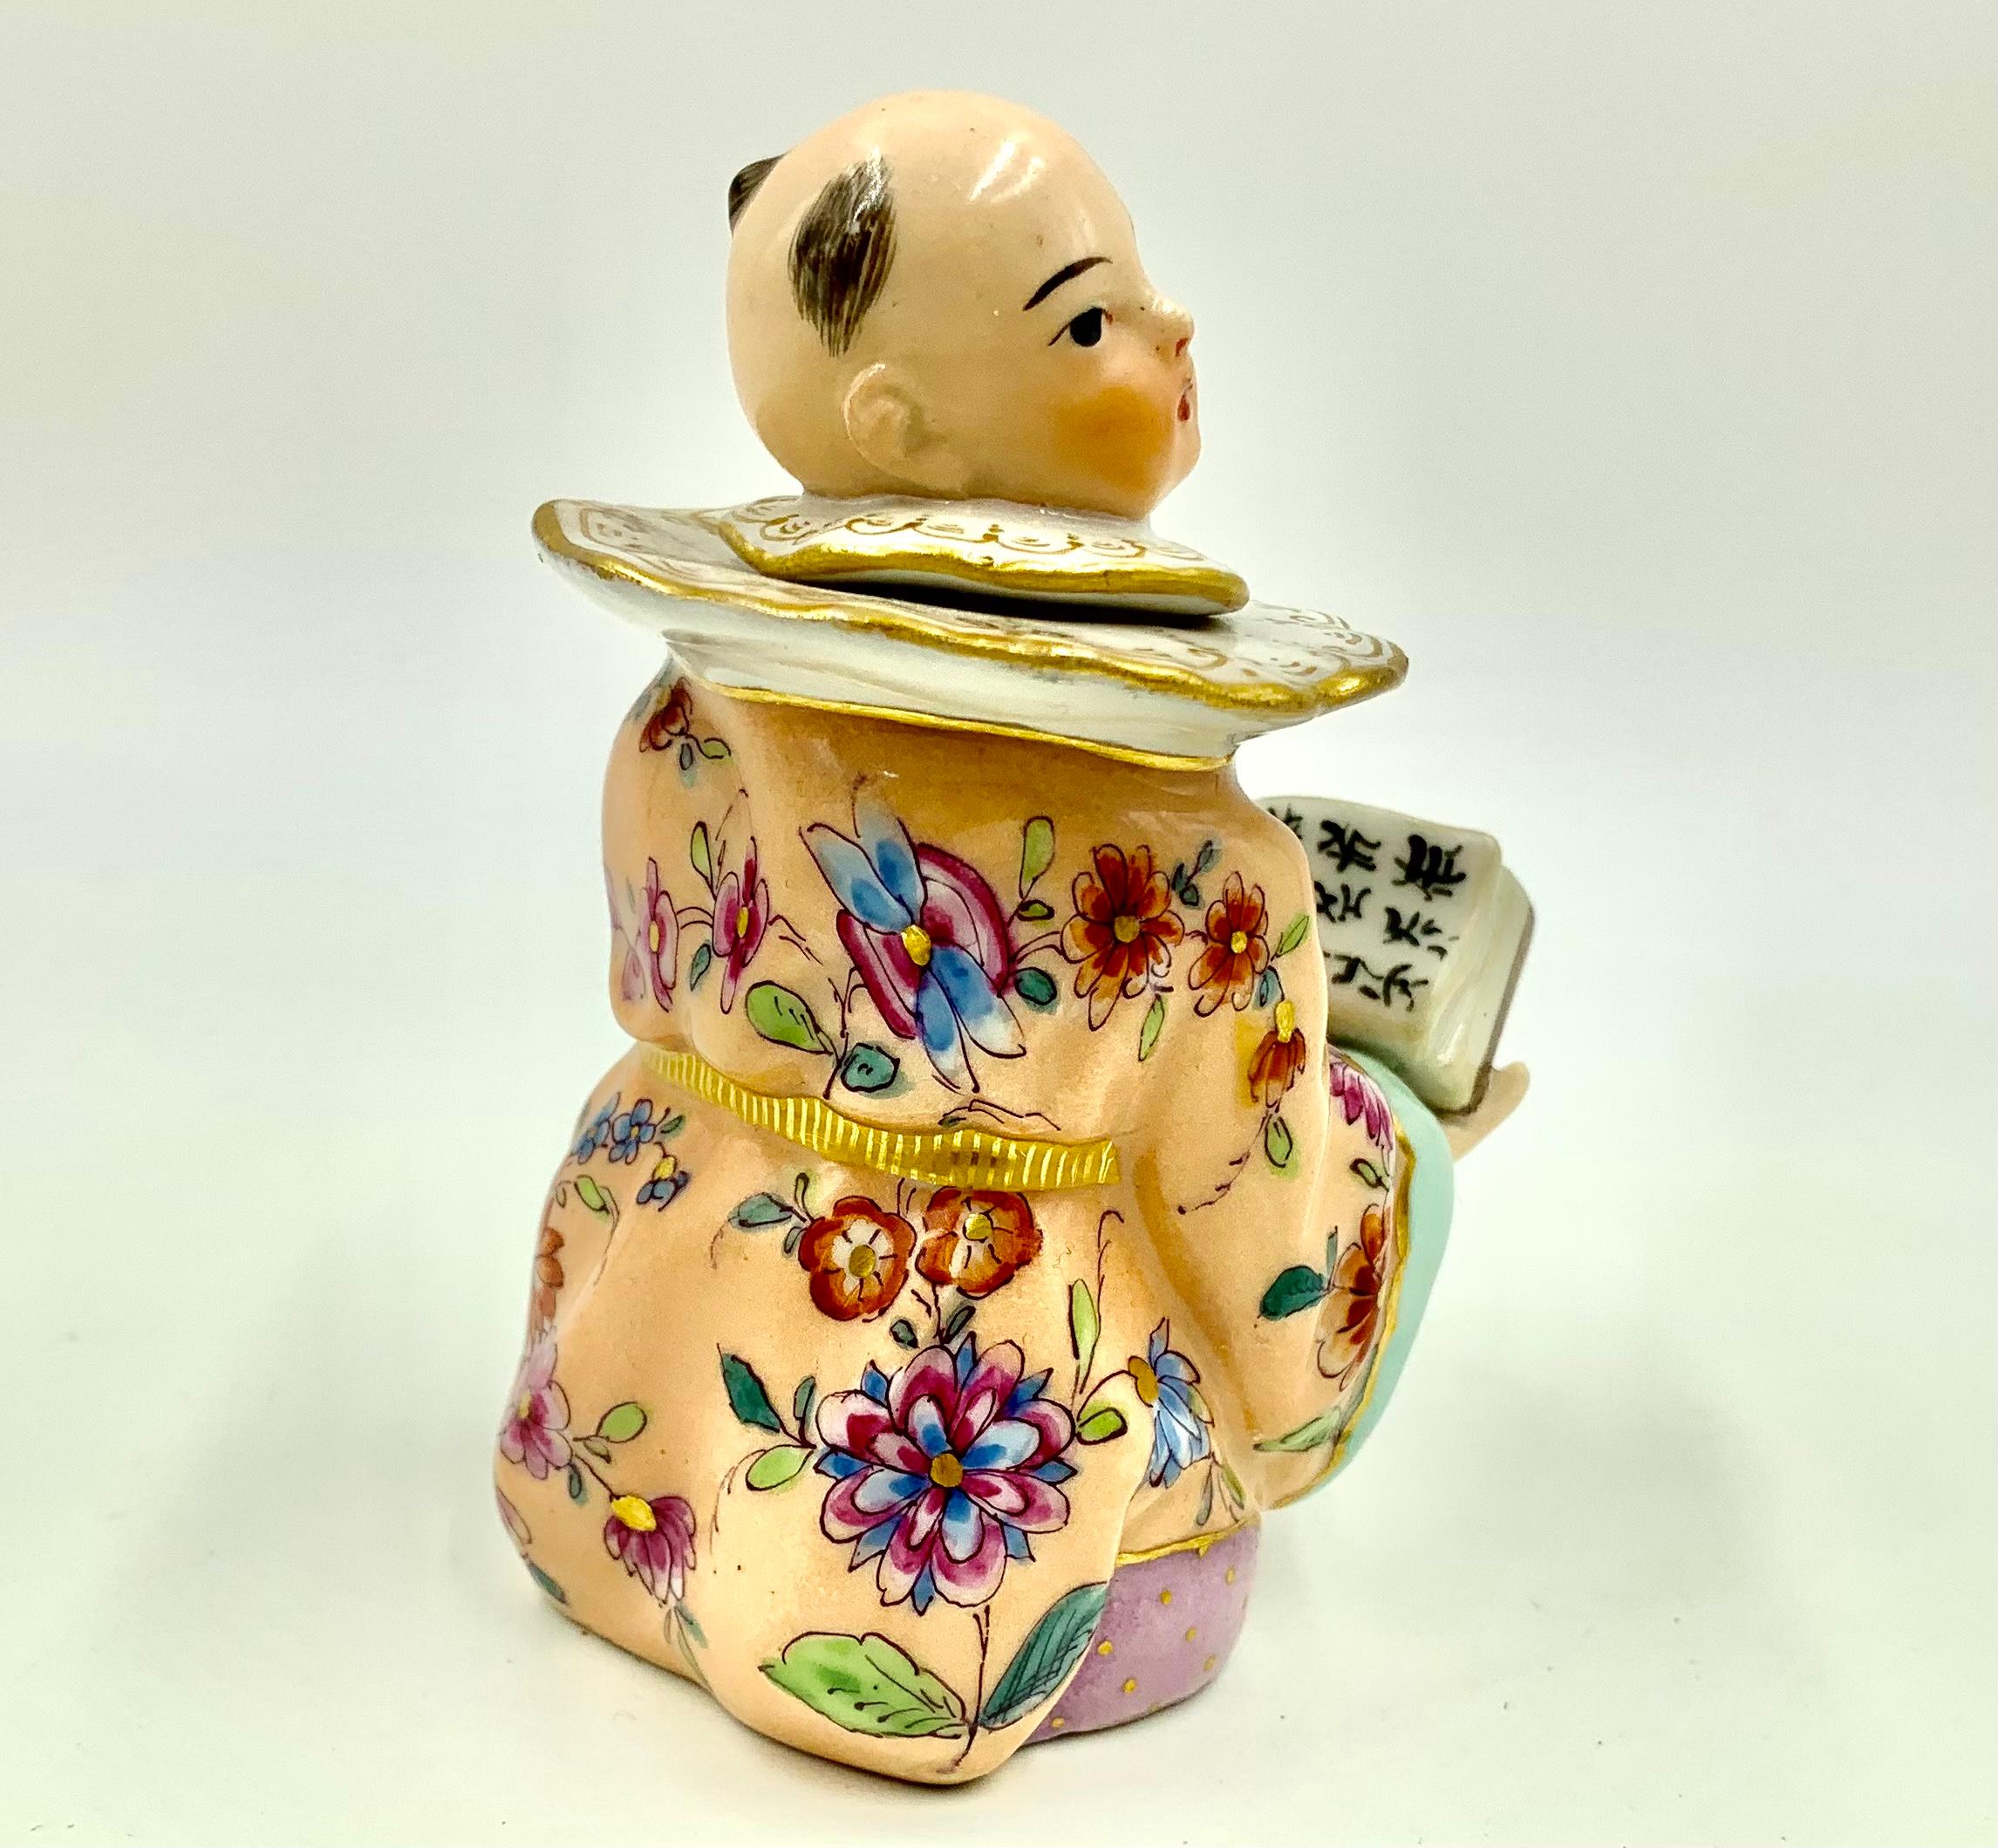 Rare KPM porcelain figural inkwell depicting a Chinaman in a wonderfully ornate traditional robe of pale apricot decorated in a flowing floral pattern of garlands of peonies, Chinese roses, camellia, hibiscus and lotus, topped with prominent gold